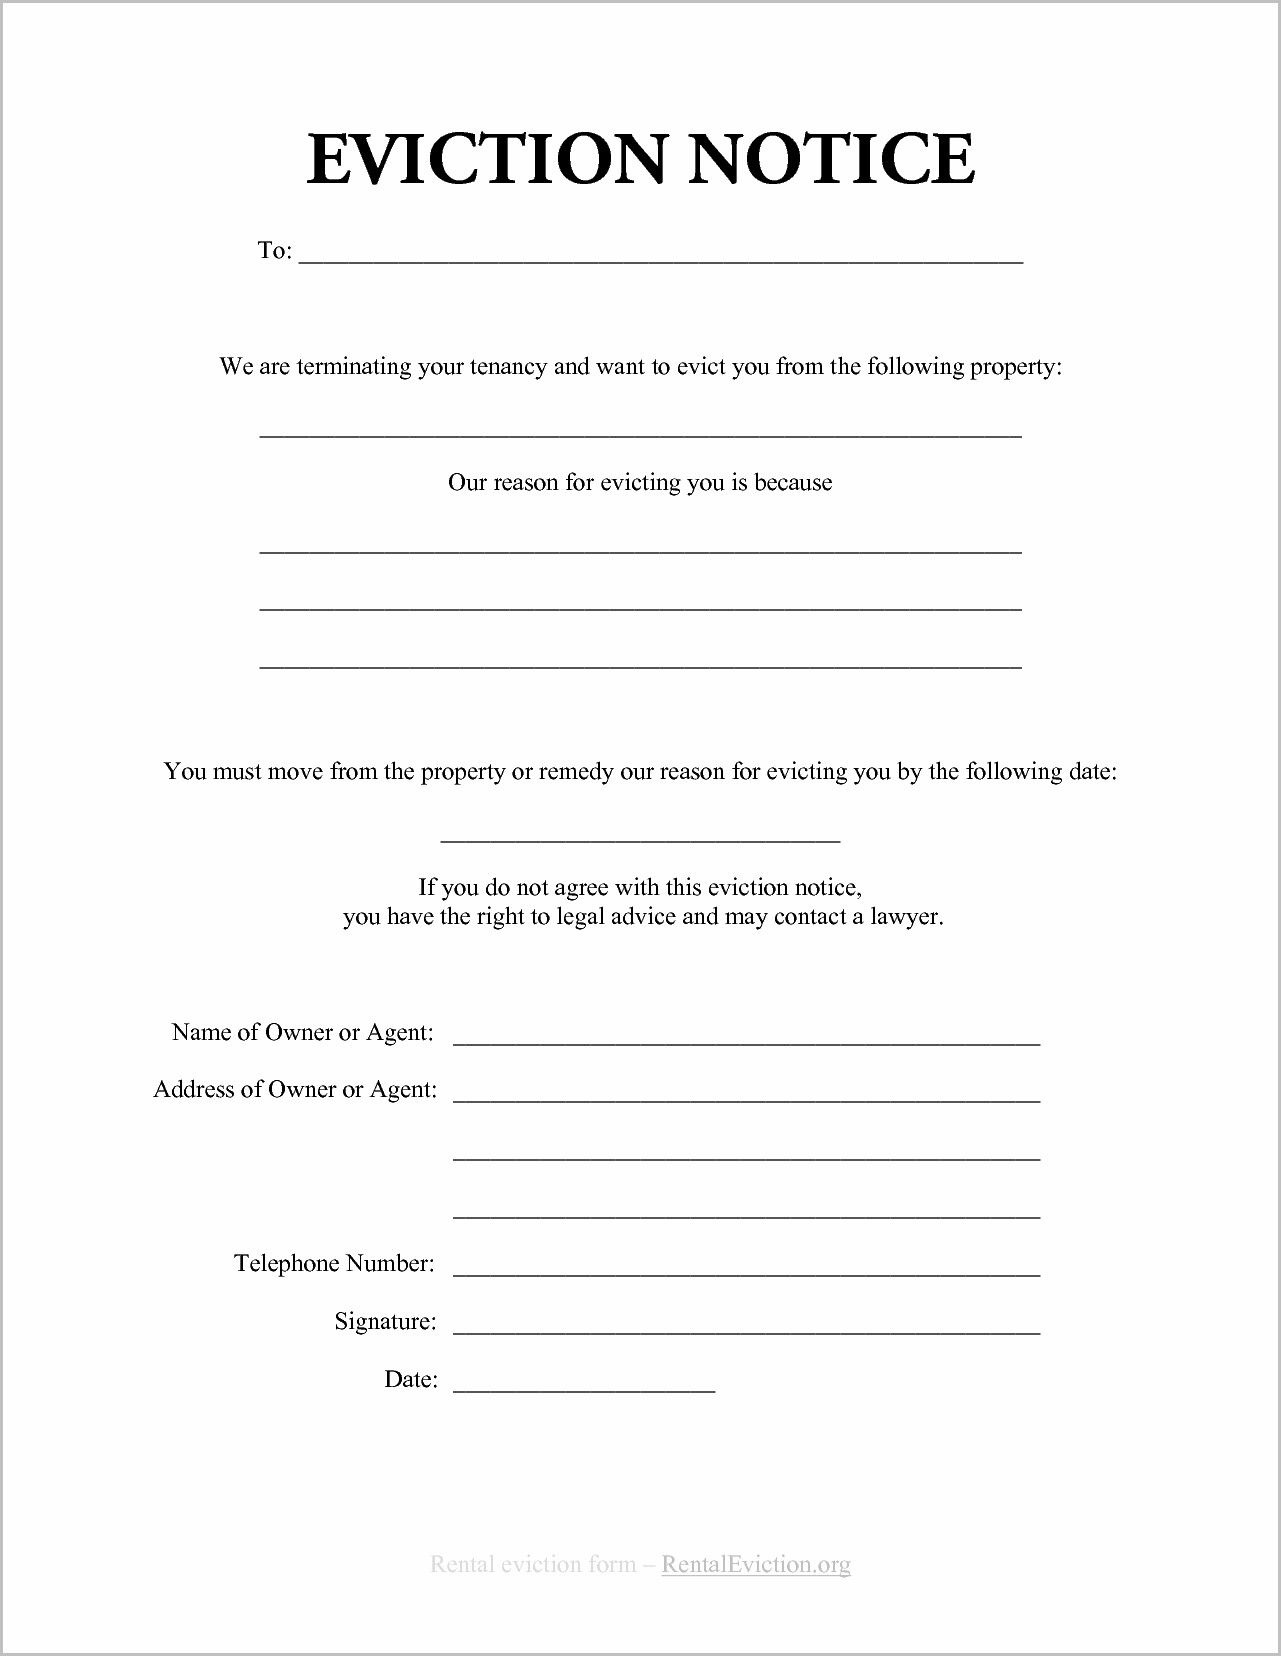 Notice Of Eviction Form Ontario | Forms | Eviction Notice, Resume - Free Printable Blank Eviction Notice